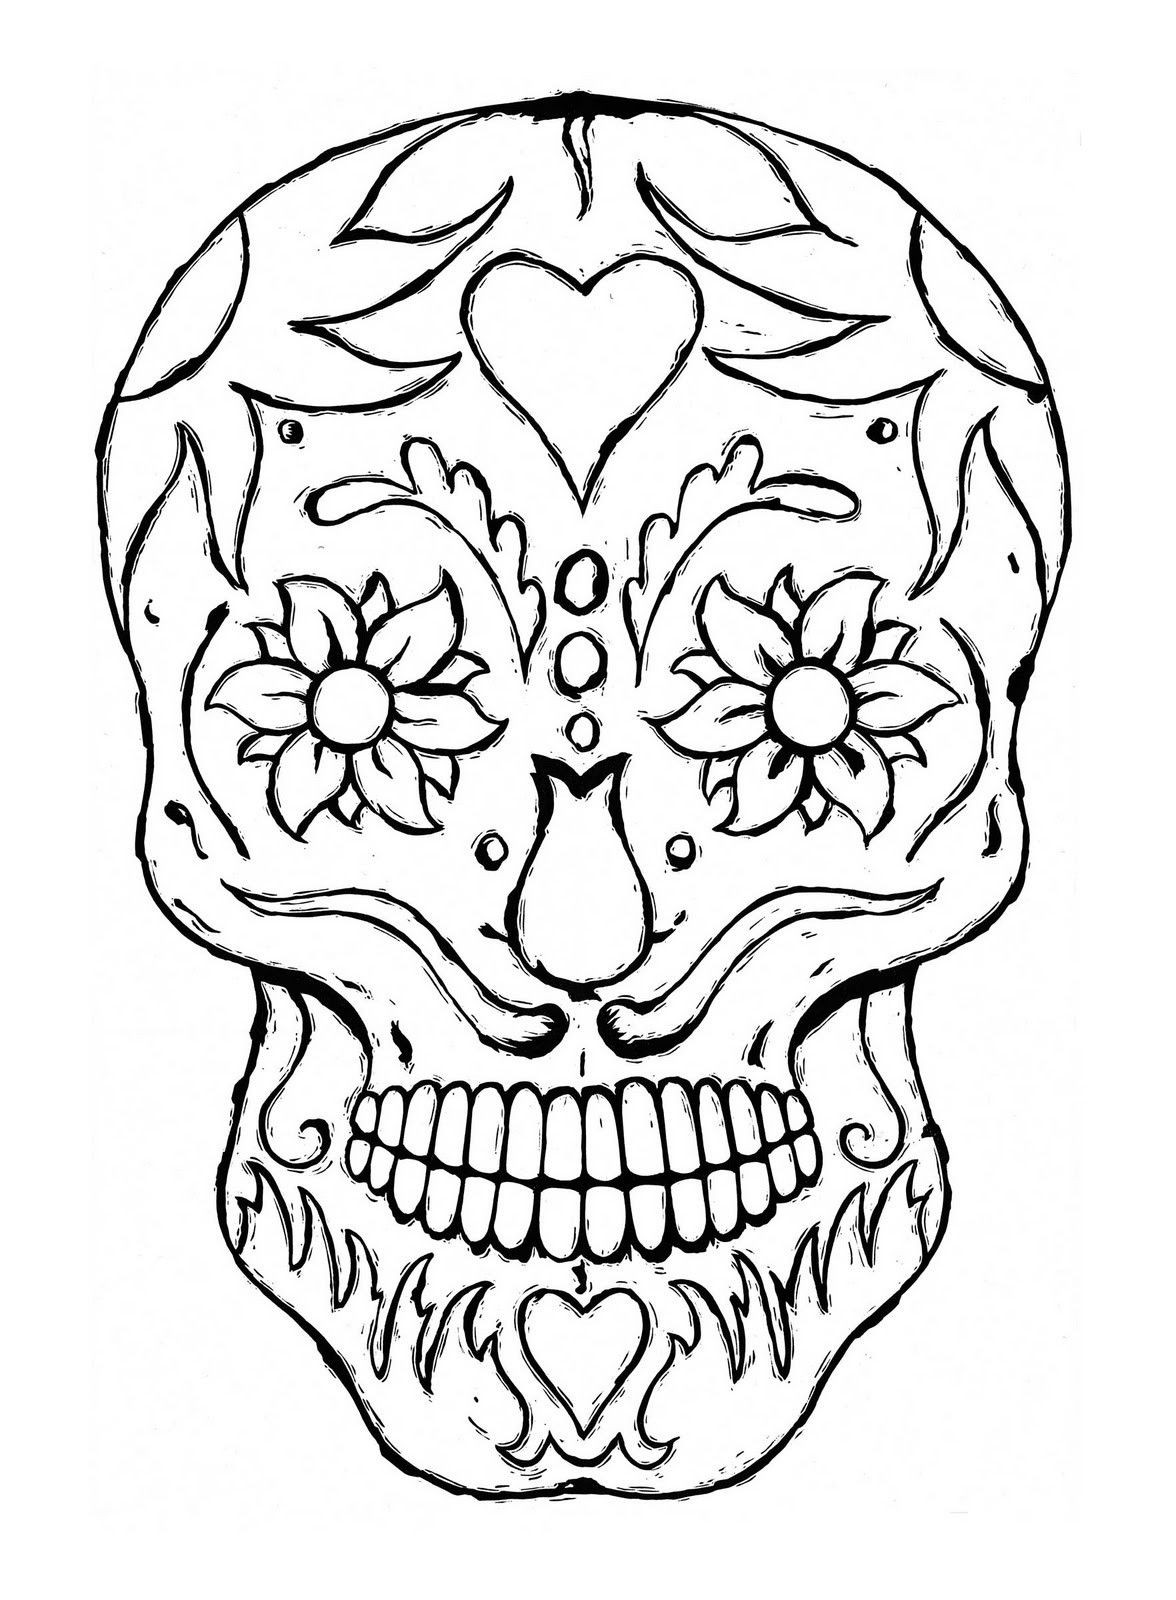 Coloring Sheets For Girls Skull
 Skull Coloring Pages For Girls Coloring Home